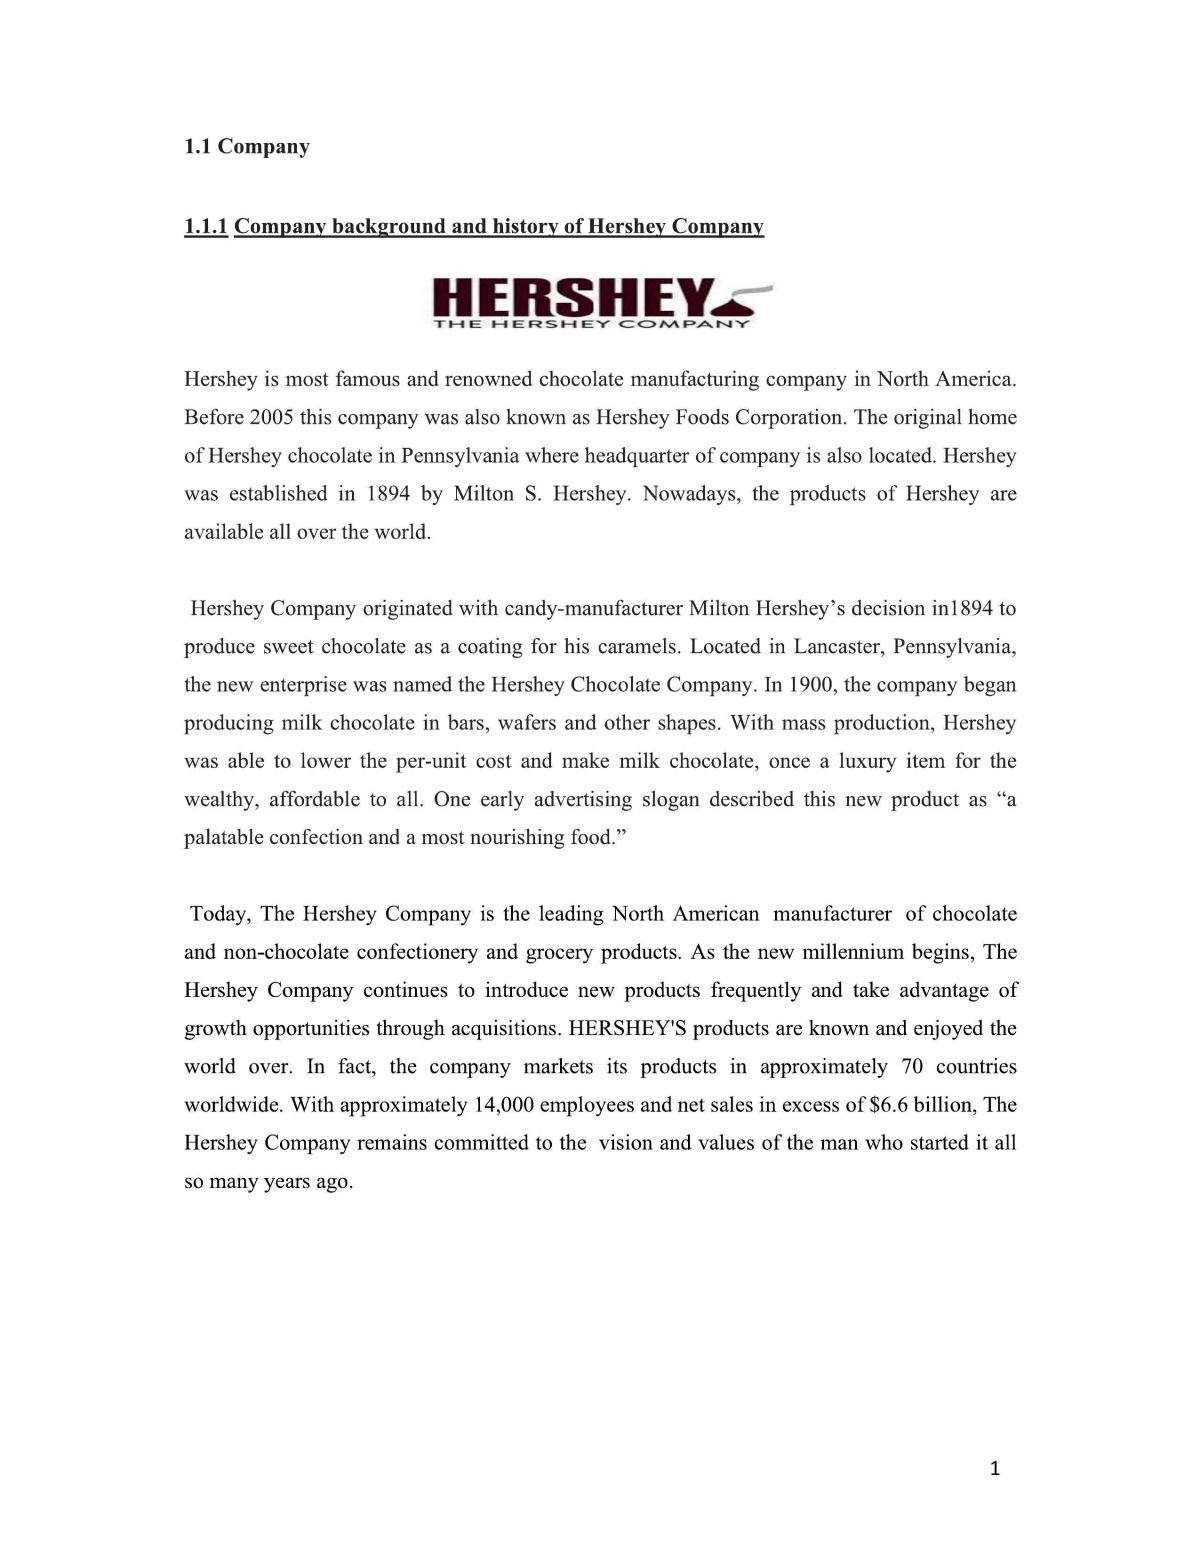 Essay discussing the marketing of Hershey Company  - Page 1